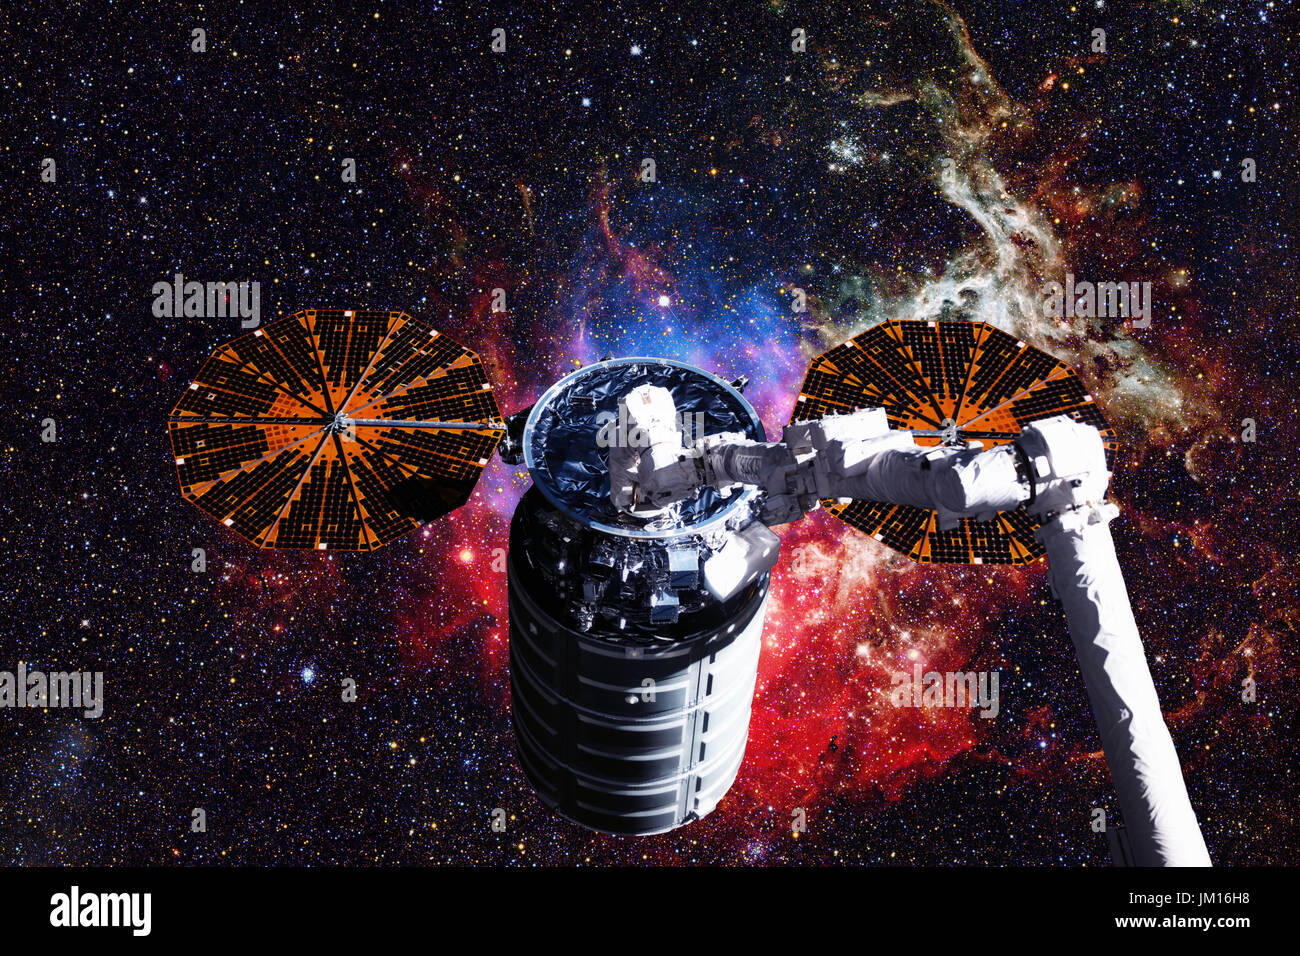 Cargo spacecraft - The Automated Transfer Vehicle over spiral galaxy. Elements of this image furnished by NASA. Stock Photo